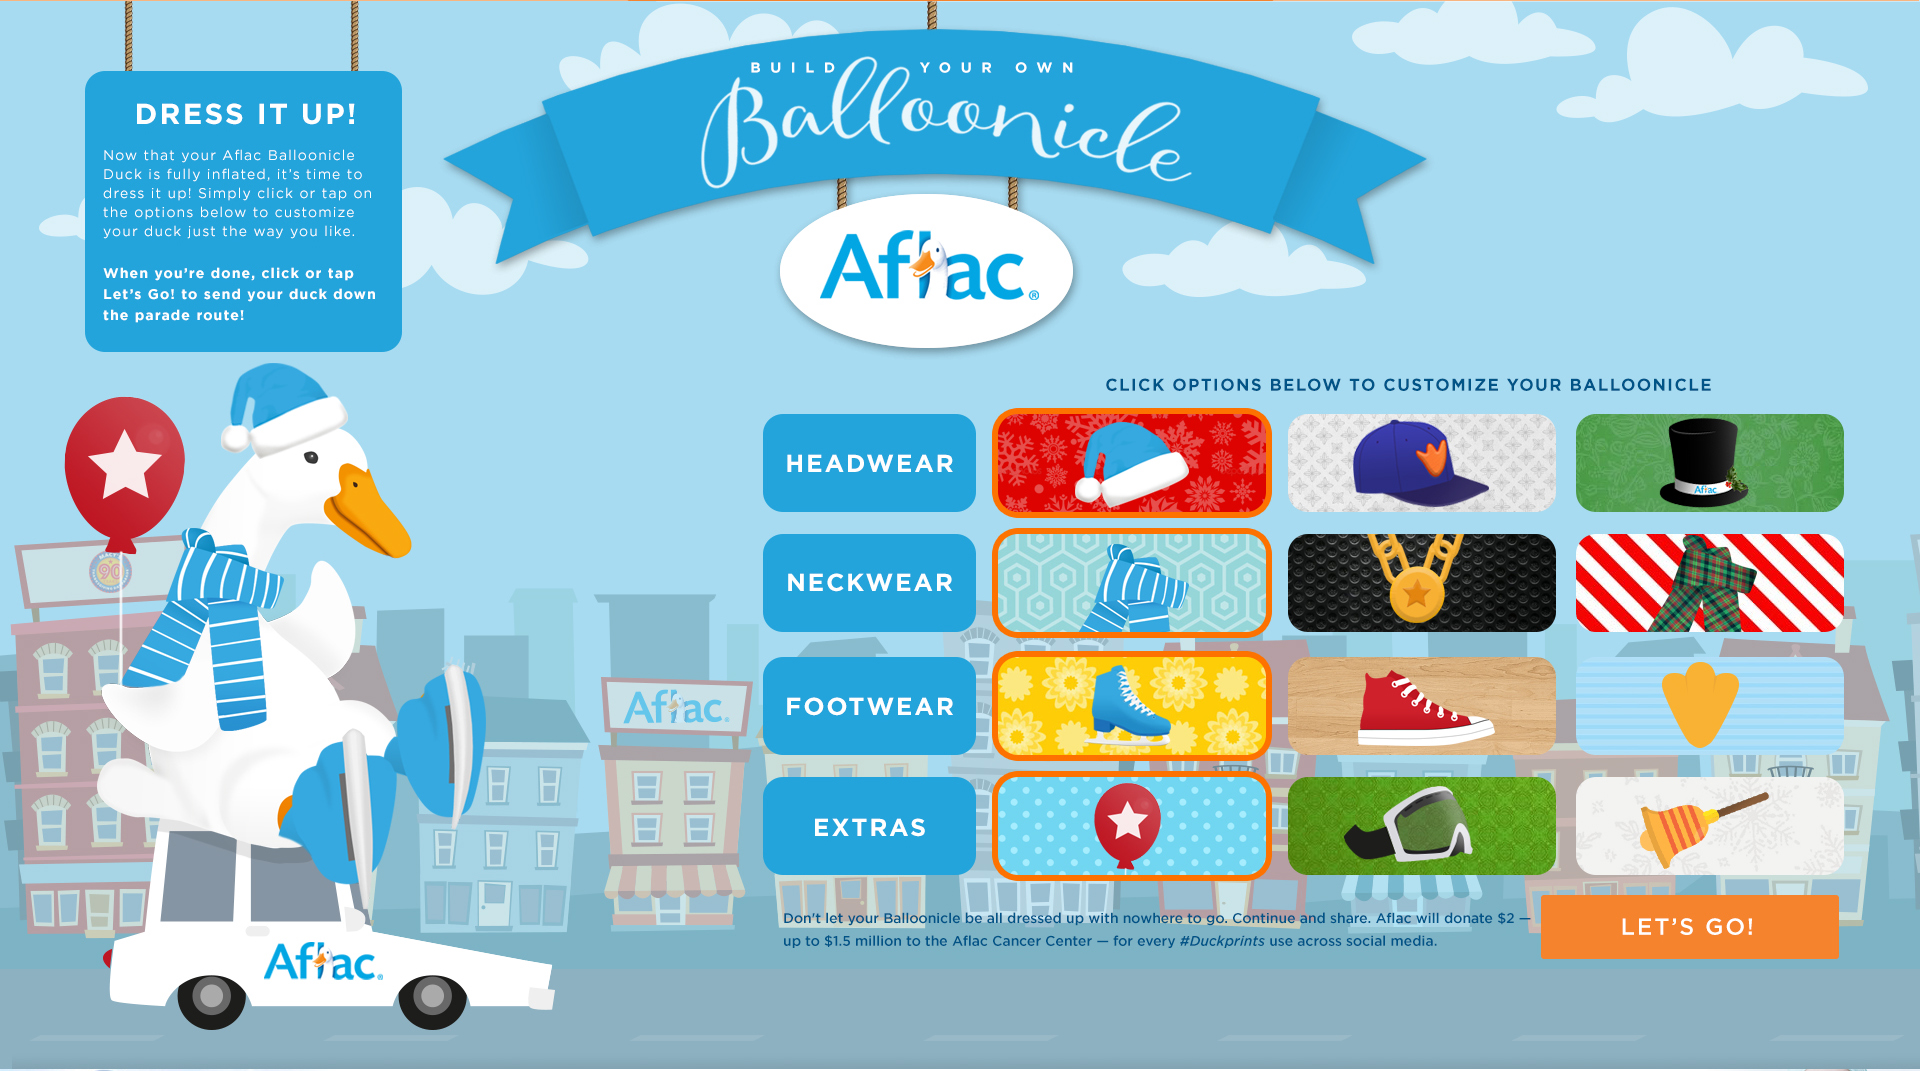 Join Aflac in the fight against childhood cancer and create your very own balloonicle in the Build Your Own Balloonicle game developed by Aflac.